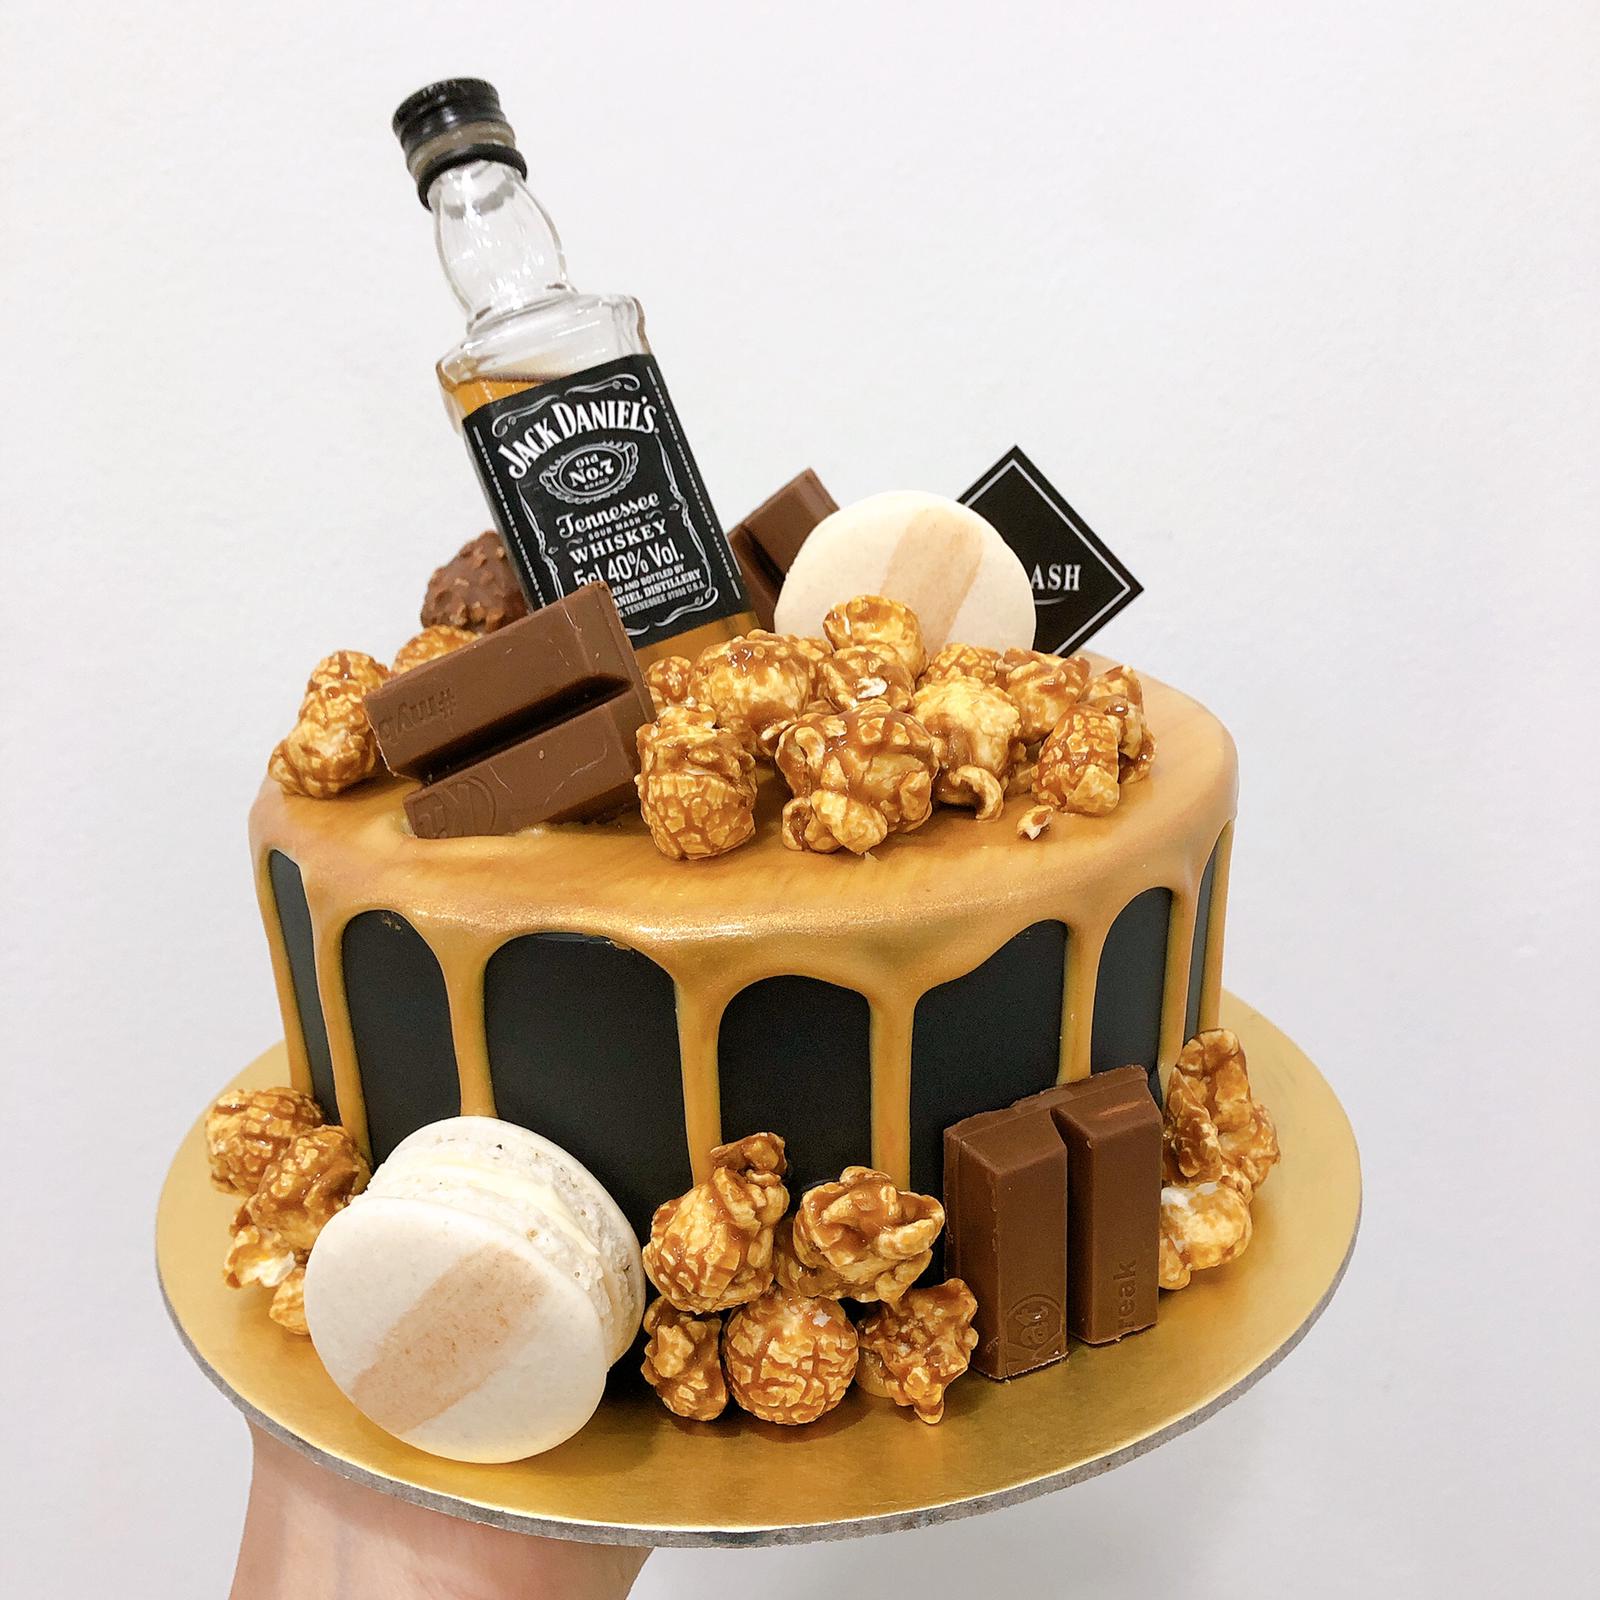 A beer theme cake, now available in Lucknow, could be the perfect gift for  your 'Talli' friend!